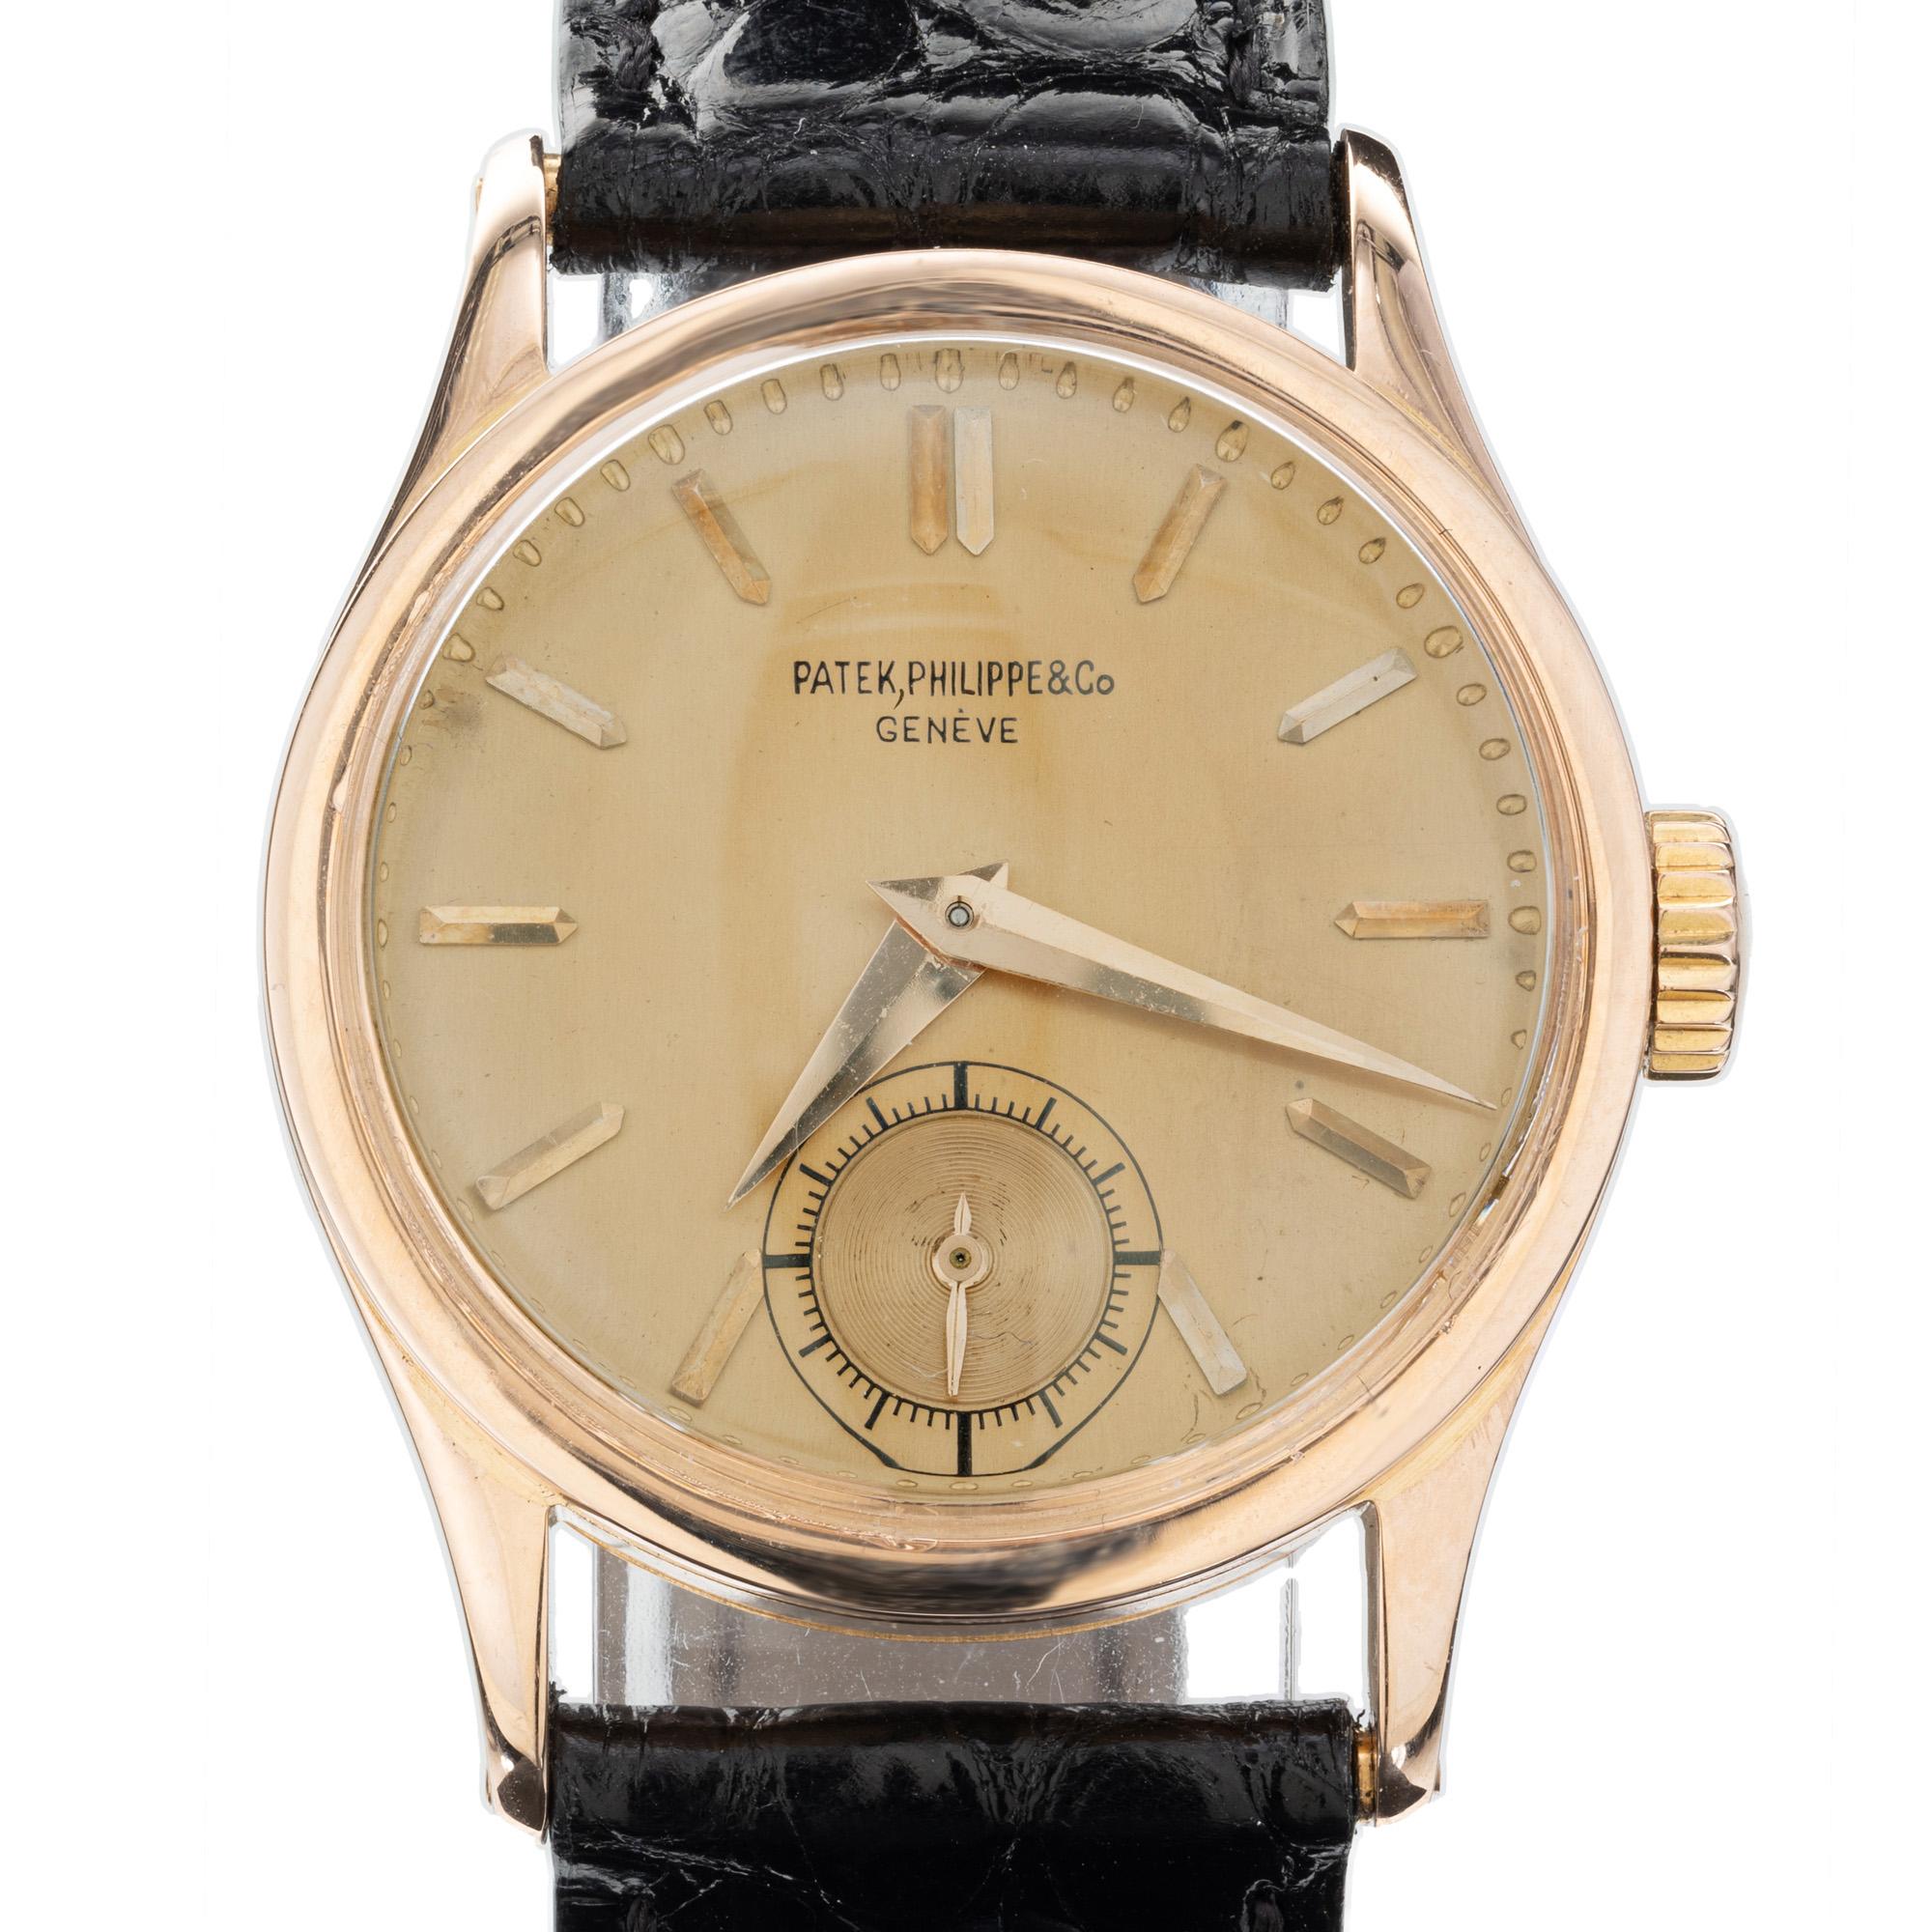 1960's Patek Philippe men's Calatrava wristwatch. 18k rose gold with gold markers. The buckle is a new 18k rose gold Patek buckle. Note: small dial stain at 10 o'clock. Fully serviced. 

Length: 38mm
Width: 30mm
Band width at case: 18mm
Case